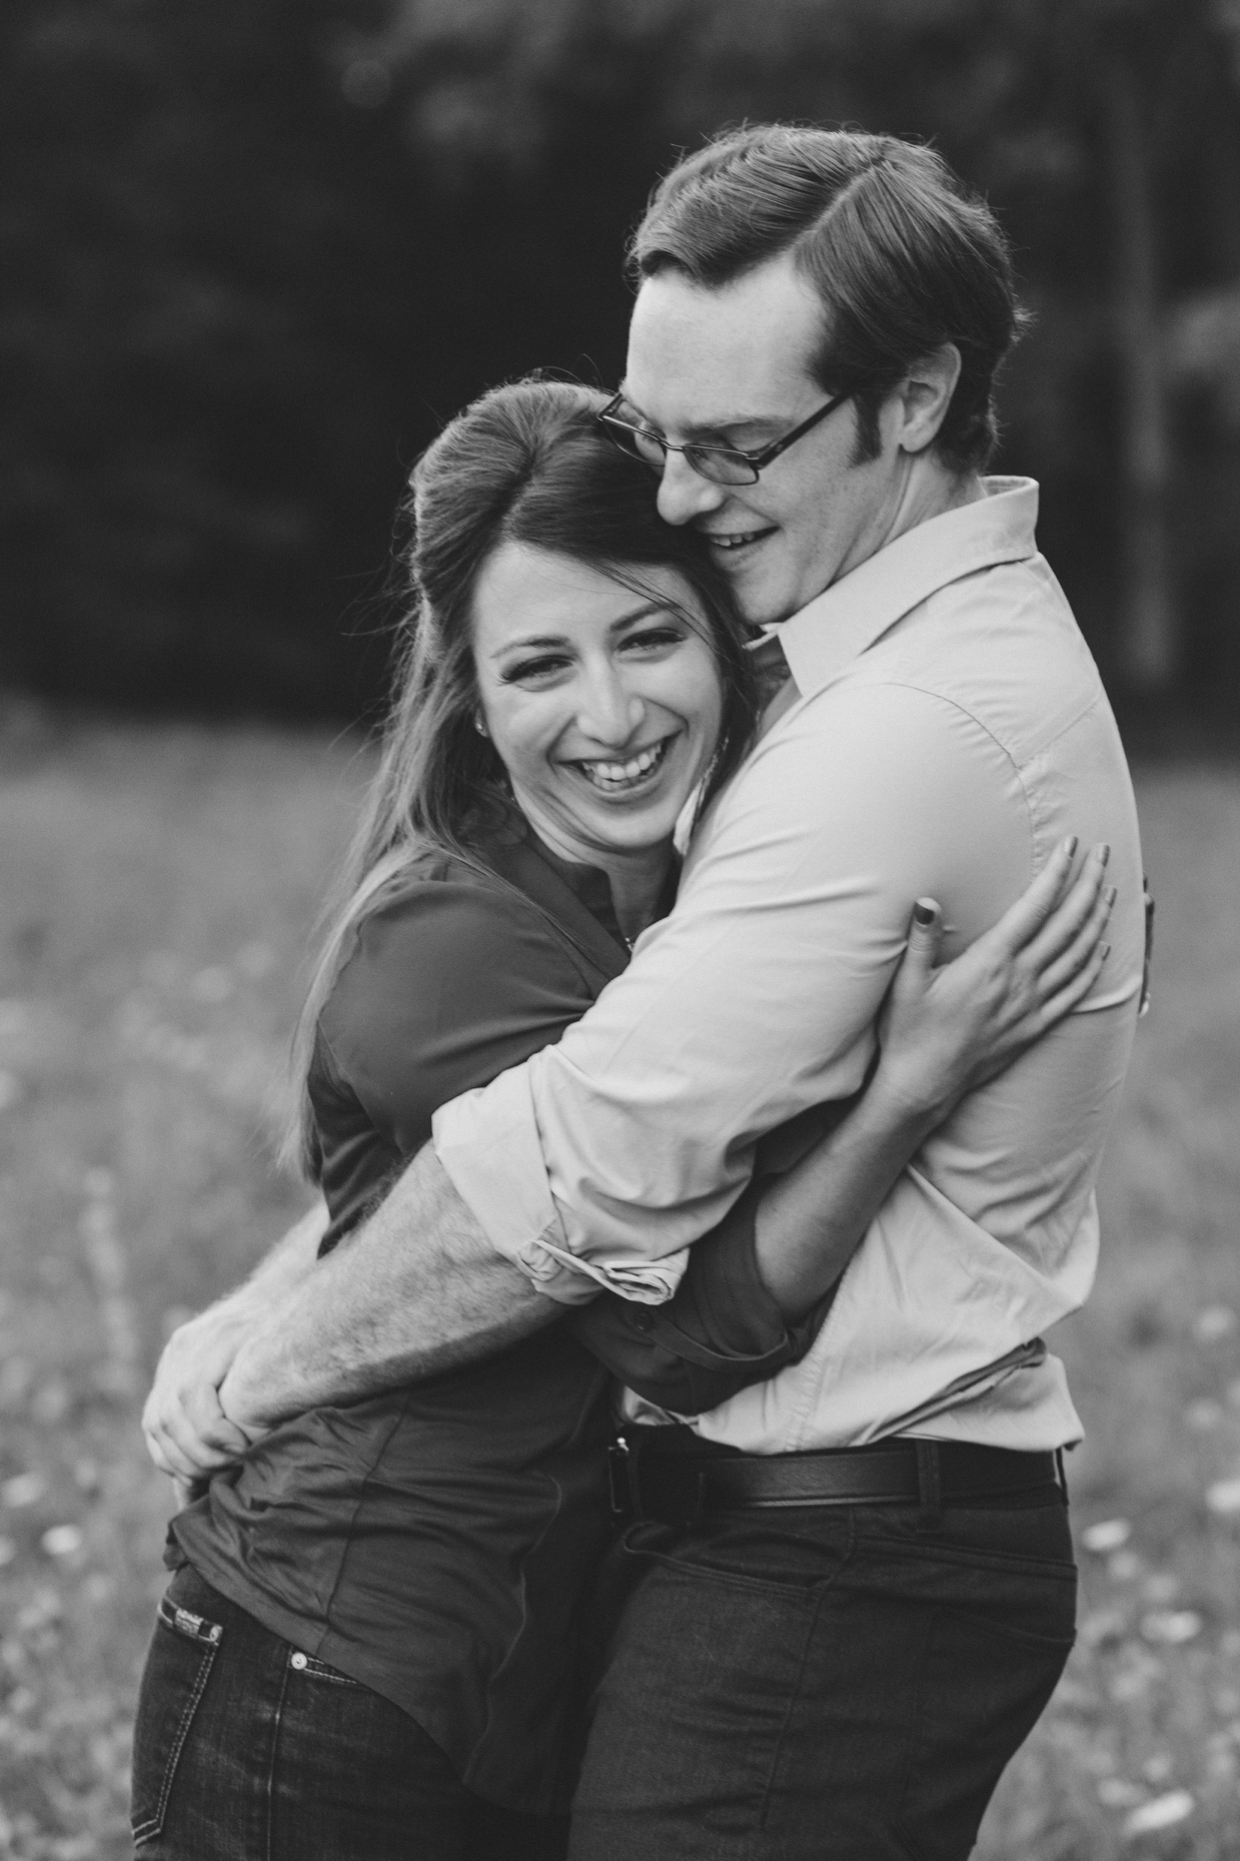 A cute photograph of a couple laughing and hugging during their engagement session at the Arnold Arboretum in Boston, Massachusetts